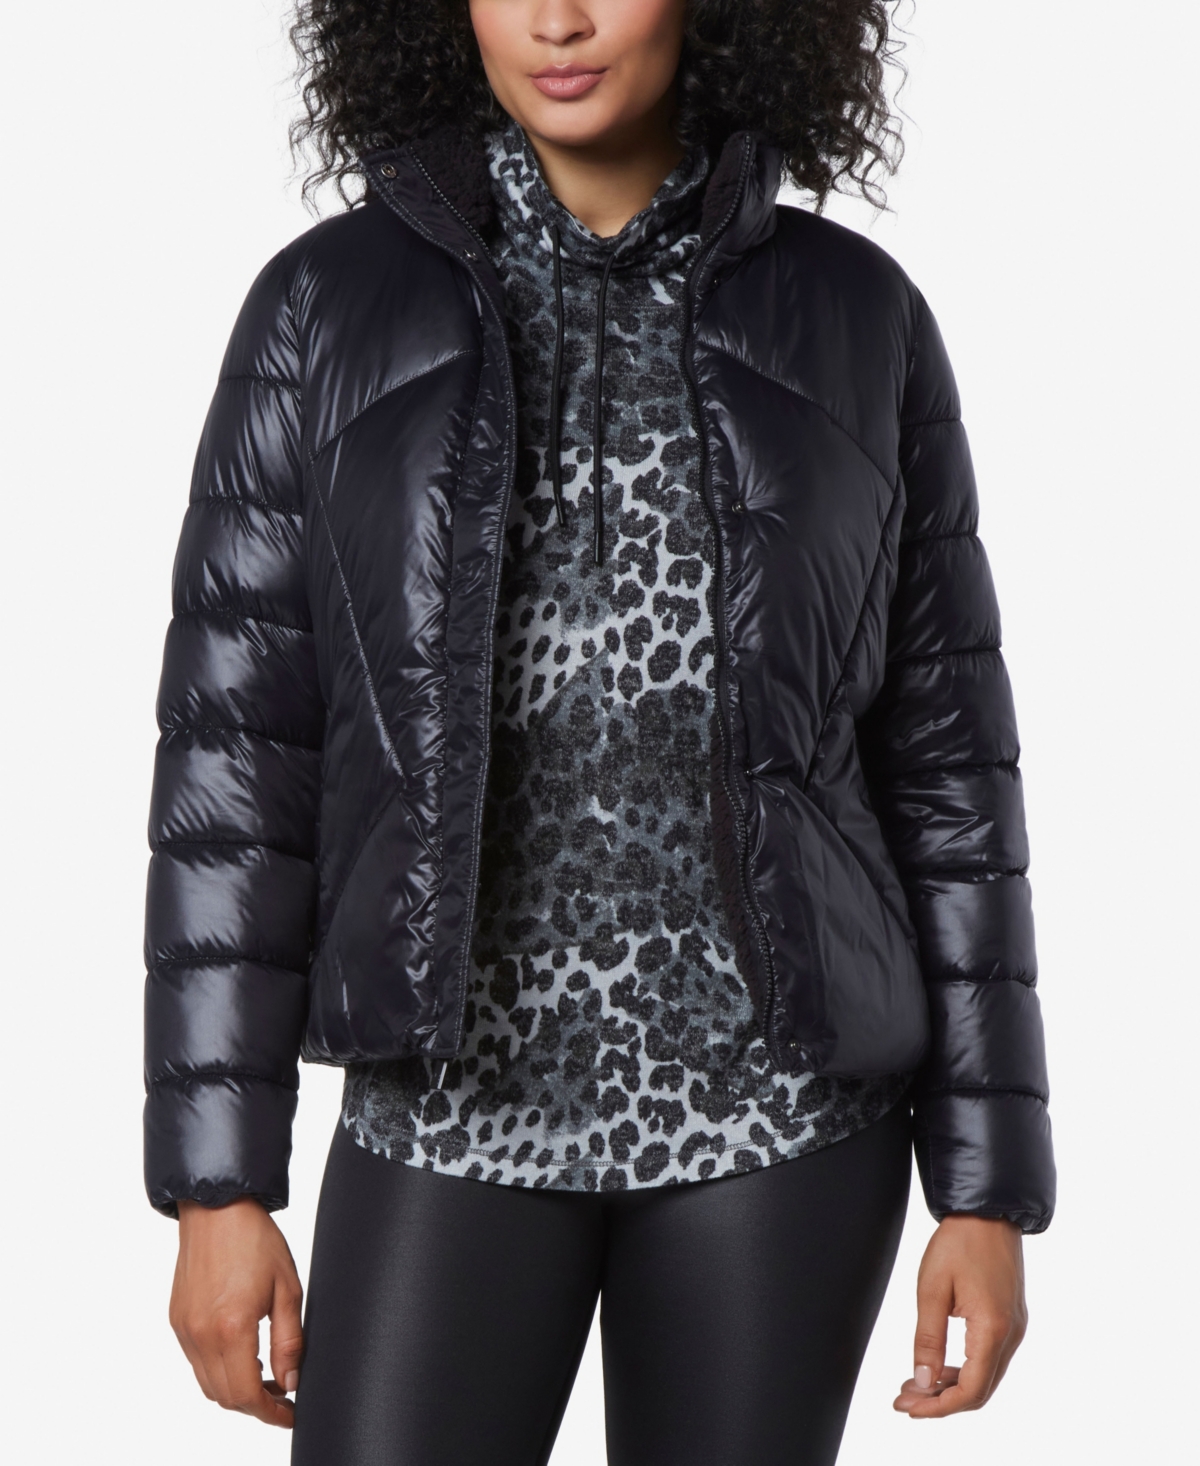 Women's Puffer Jacket With Sherpa Lining - Black